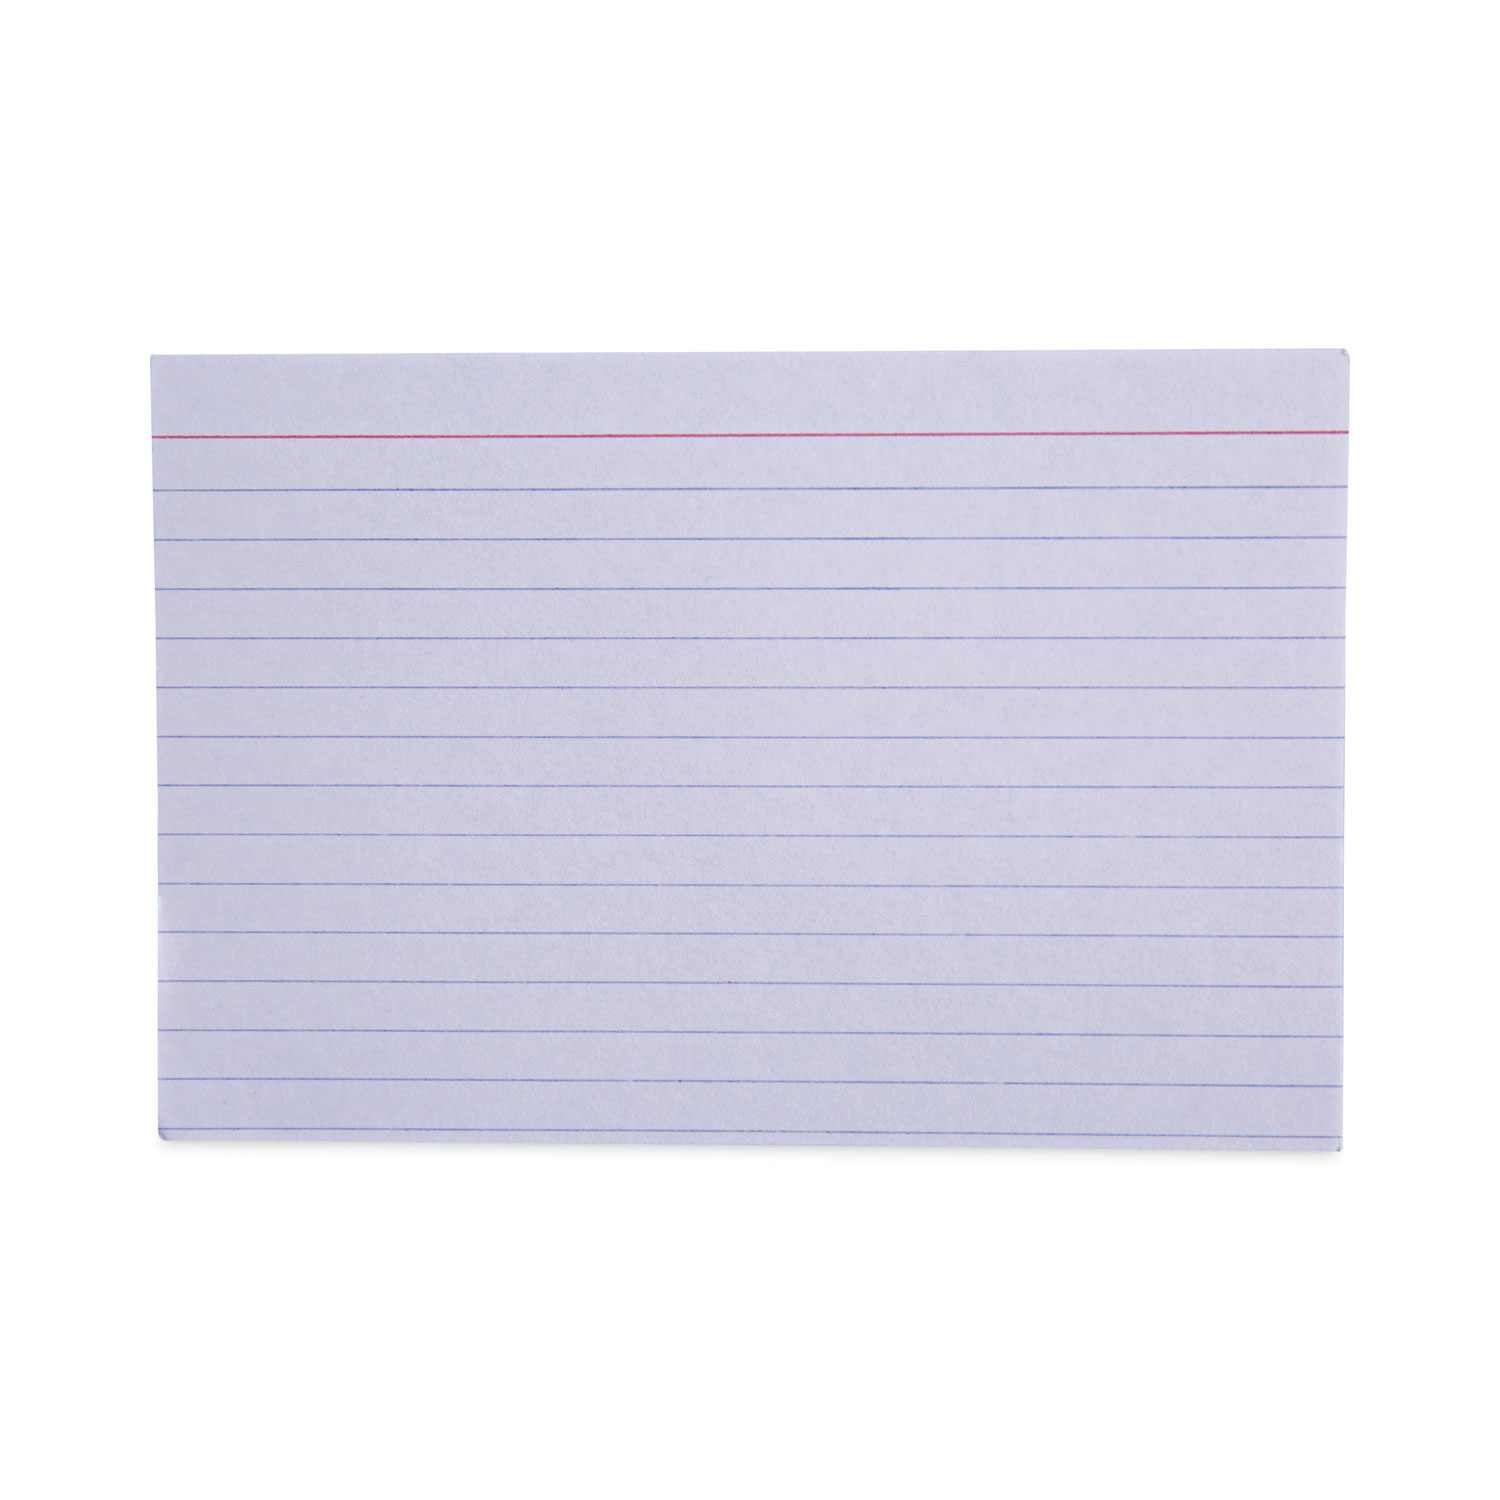 Top Flight Index Cards 4 Inch x 6 Inch Unruled - 100 Count - Albertsons